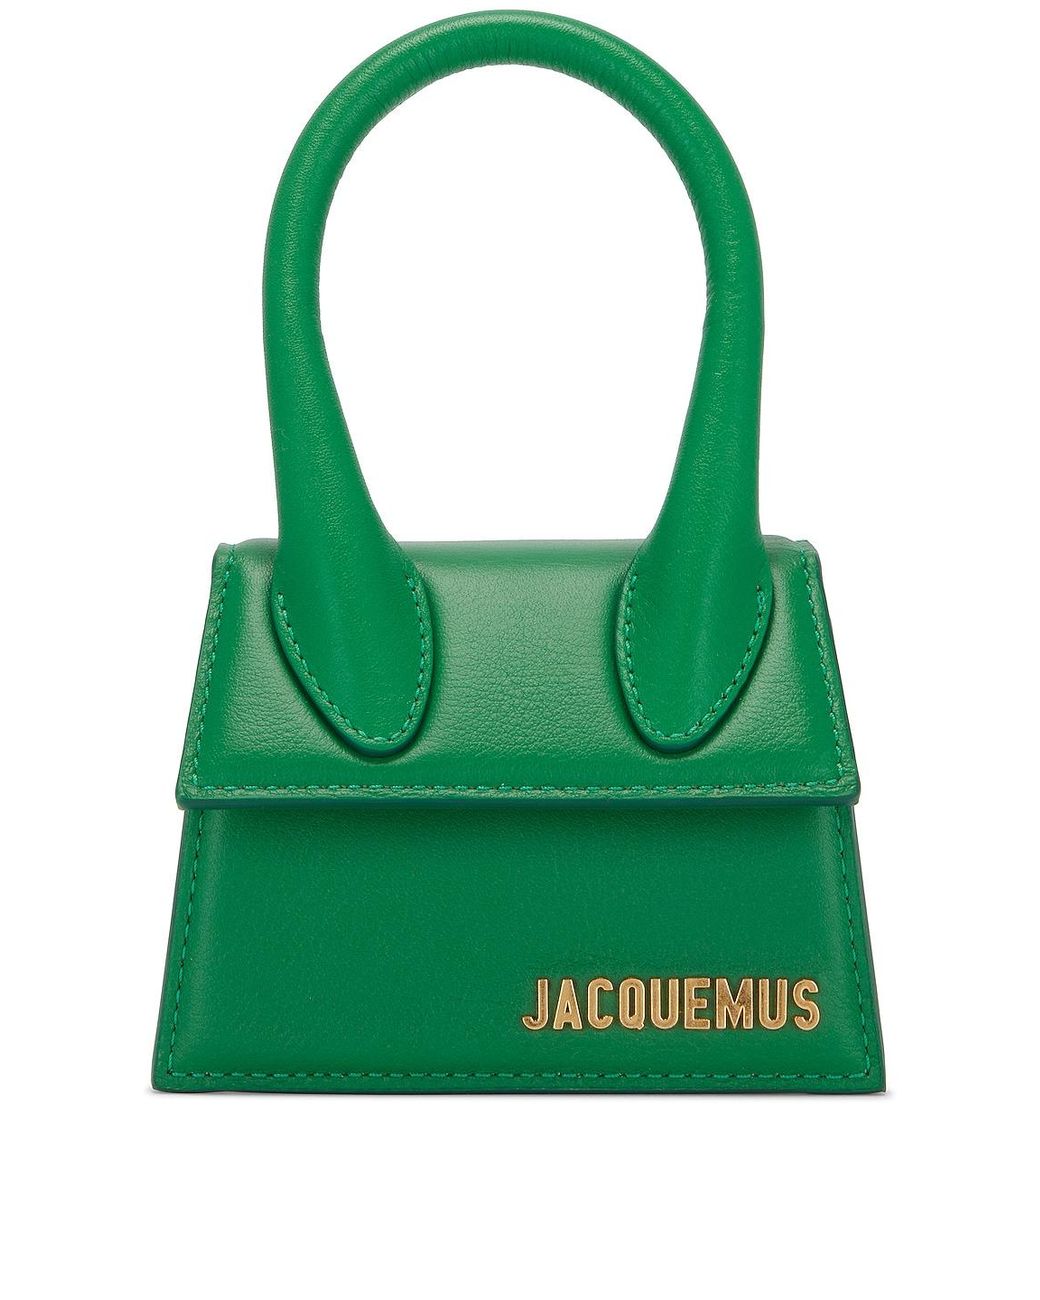 Jacquemus Leather Le Chiquito Bag in Green | Lyst